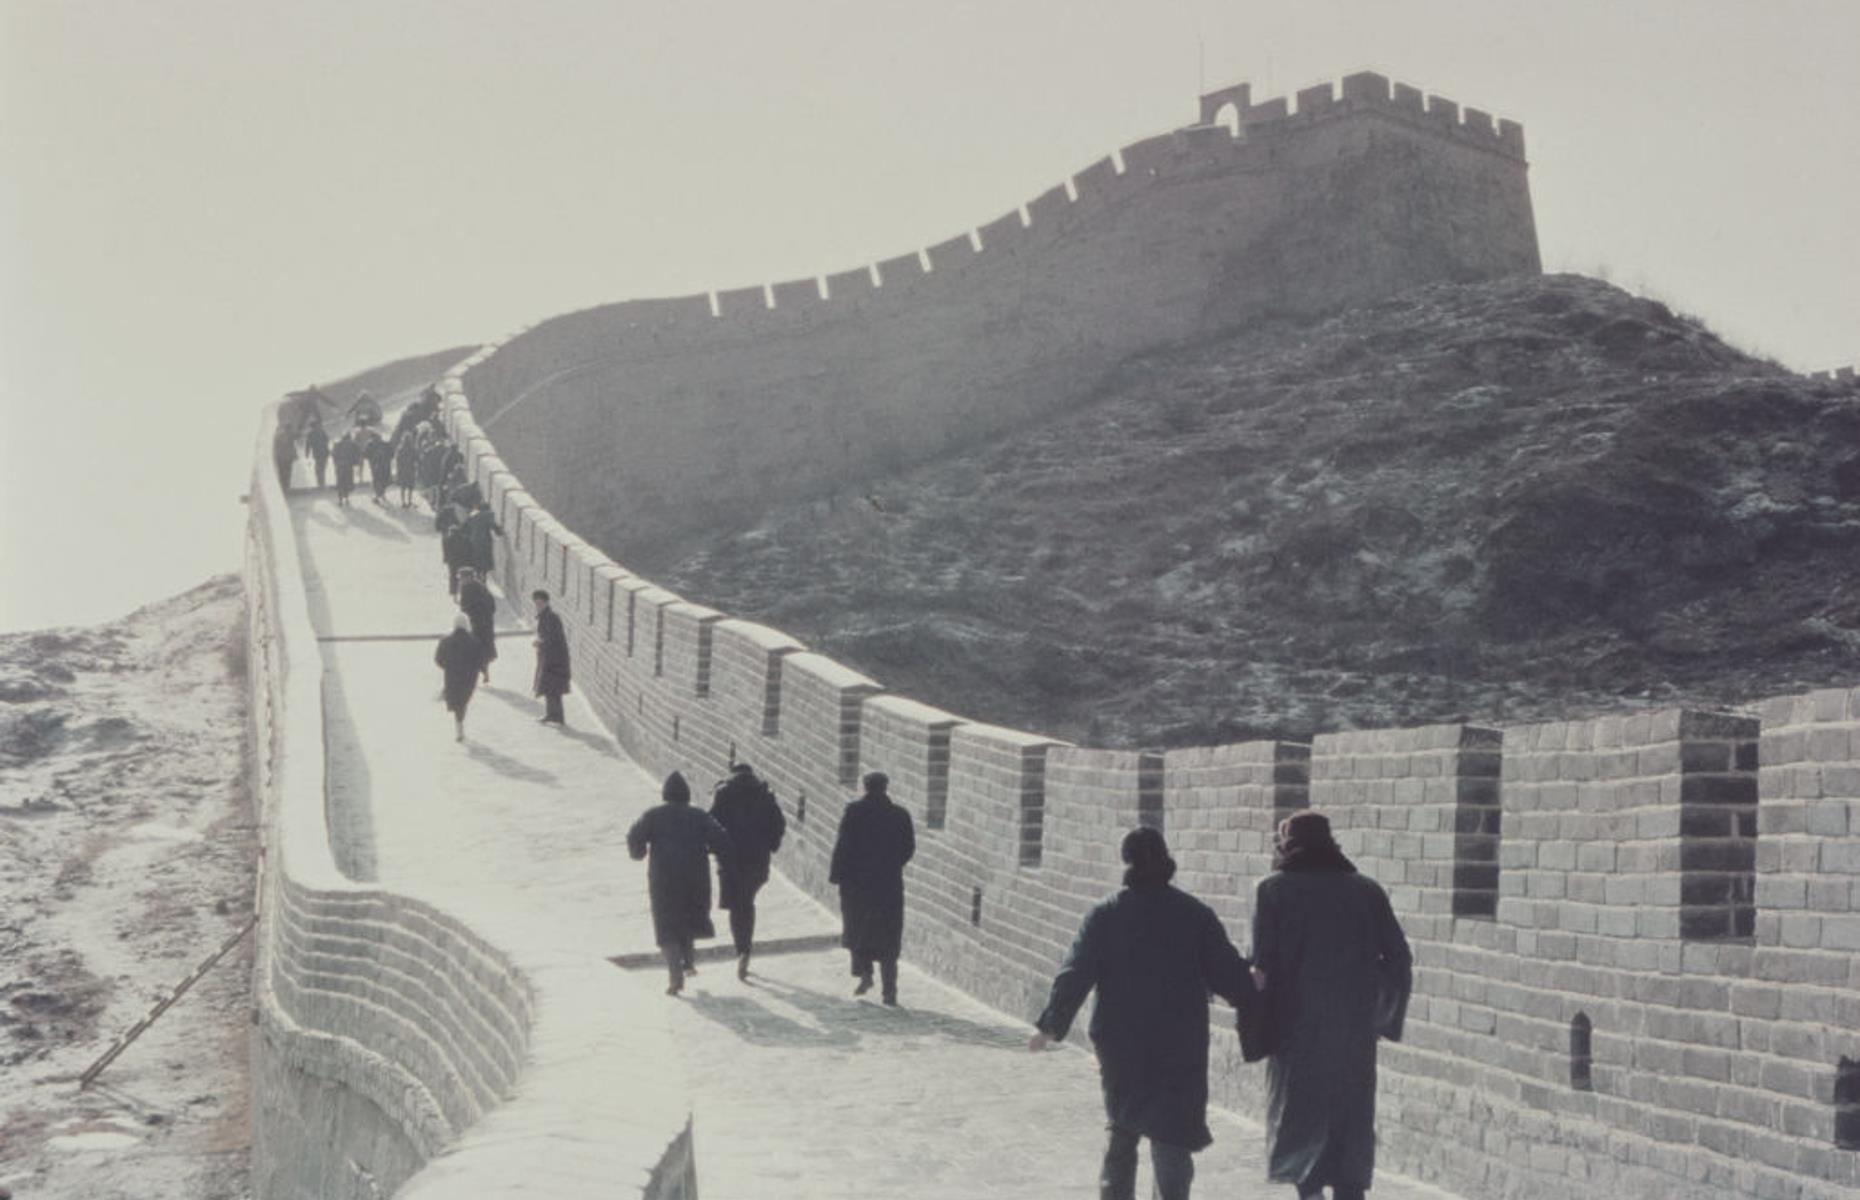 The cultural revolution of the 1960s saw the wall denounced as a symbol of the feudal past and there was a campaign to neglect or even destroy it. Stones and bricks were taken away to be used in modern housing. In the 1980s, it was again recognized for its national importance and a renovation campaign began. In 1987, it became a UNESCO World Heritage Site and the quiet days of the wall were over as the tourists began to flood in.